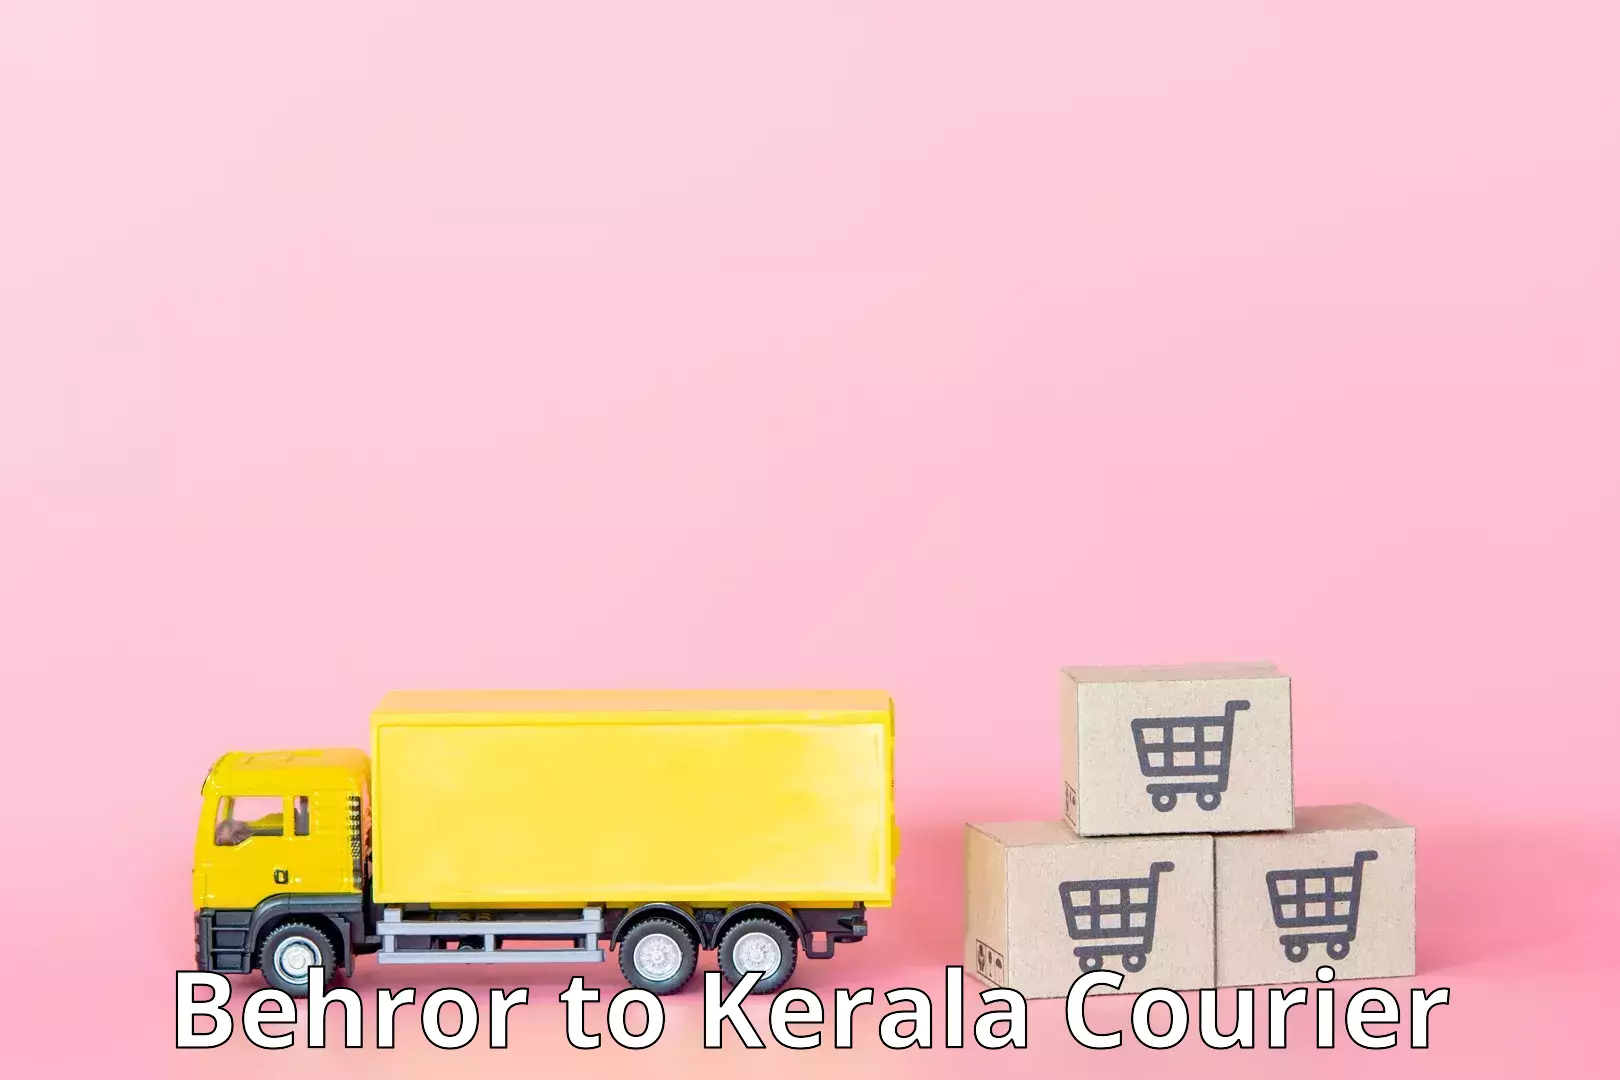 Express postal services in Behror to Chervathur